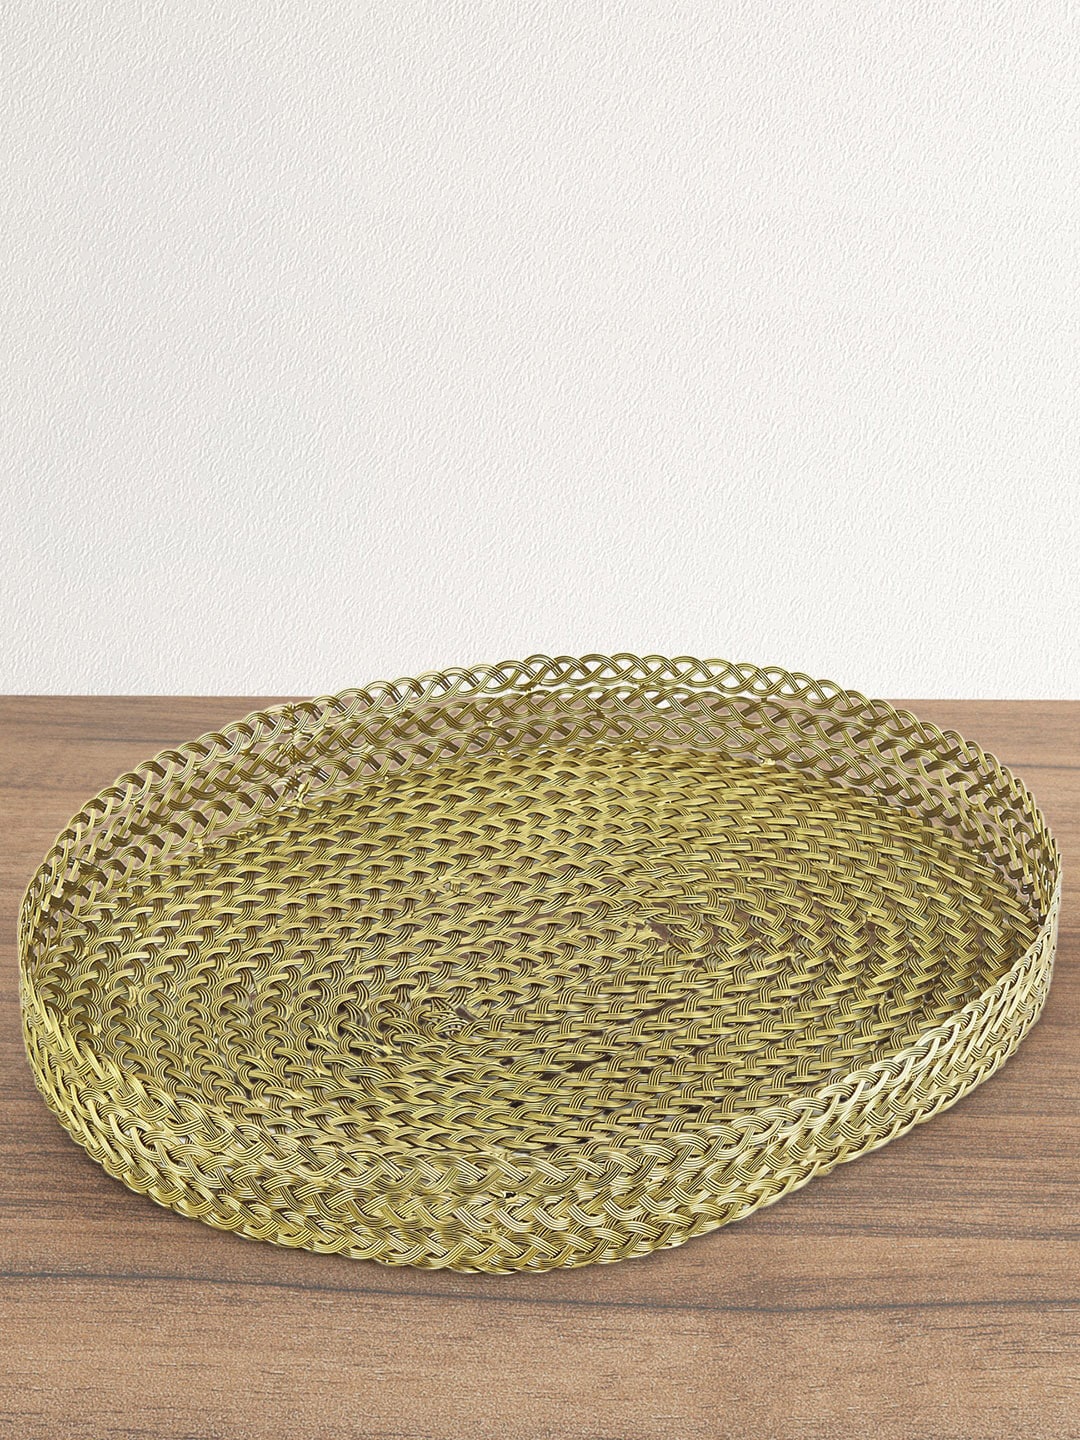 Living scapes by Pantaloons Gold-Toned Textured Serving Tray Price in India